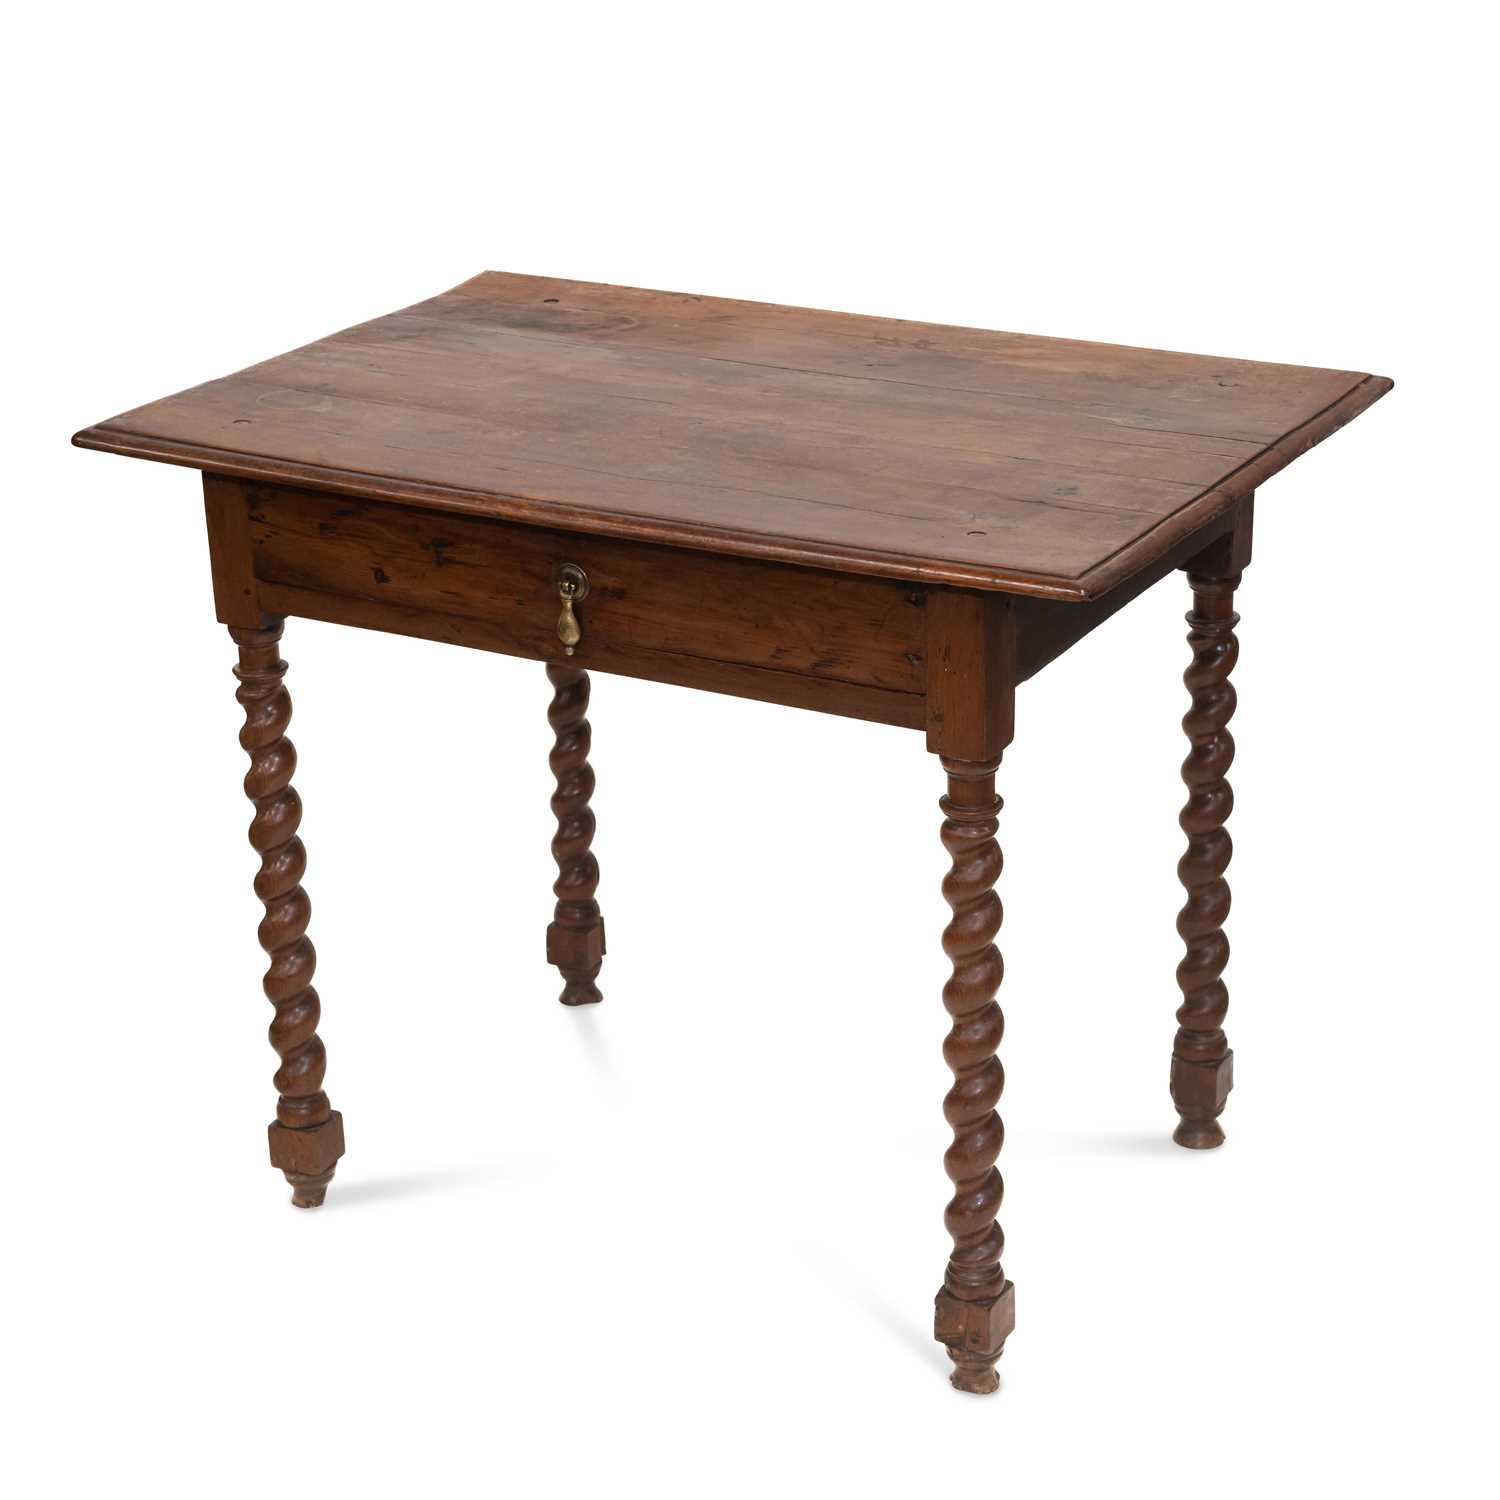 AN 18TH CENTURY YEW WOOD SIDE TABLE